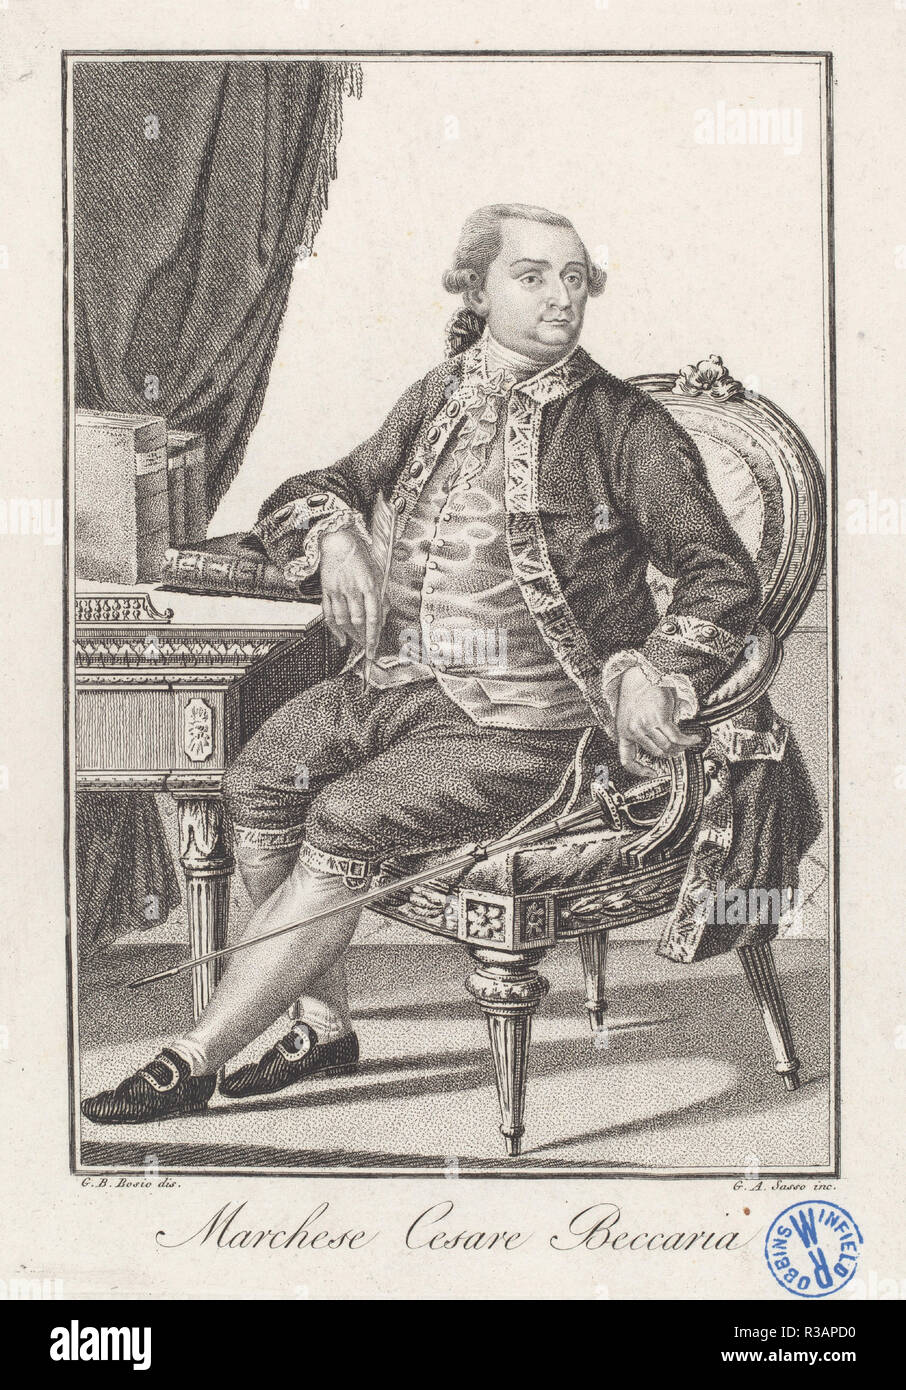 Marchese Cesare Beccaria. Dated: 1815-1818. Dimensions: sheet: 23 × 16.6 cm (9 1/16 × 6 9/16 in.)  plate: 19.8 × 14 cm (7 13/16 × 5 1/2 in.). Medium: etching and stipple engraving. Museum: National Gallery of Art, Washington DC. Author: Giovanni Antonio Sasso, after G. B. Bosio. Stock Photo